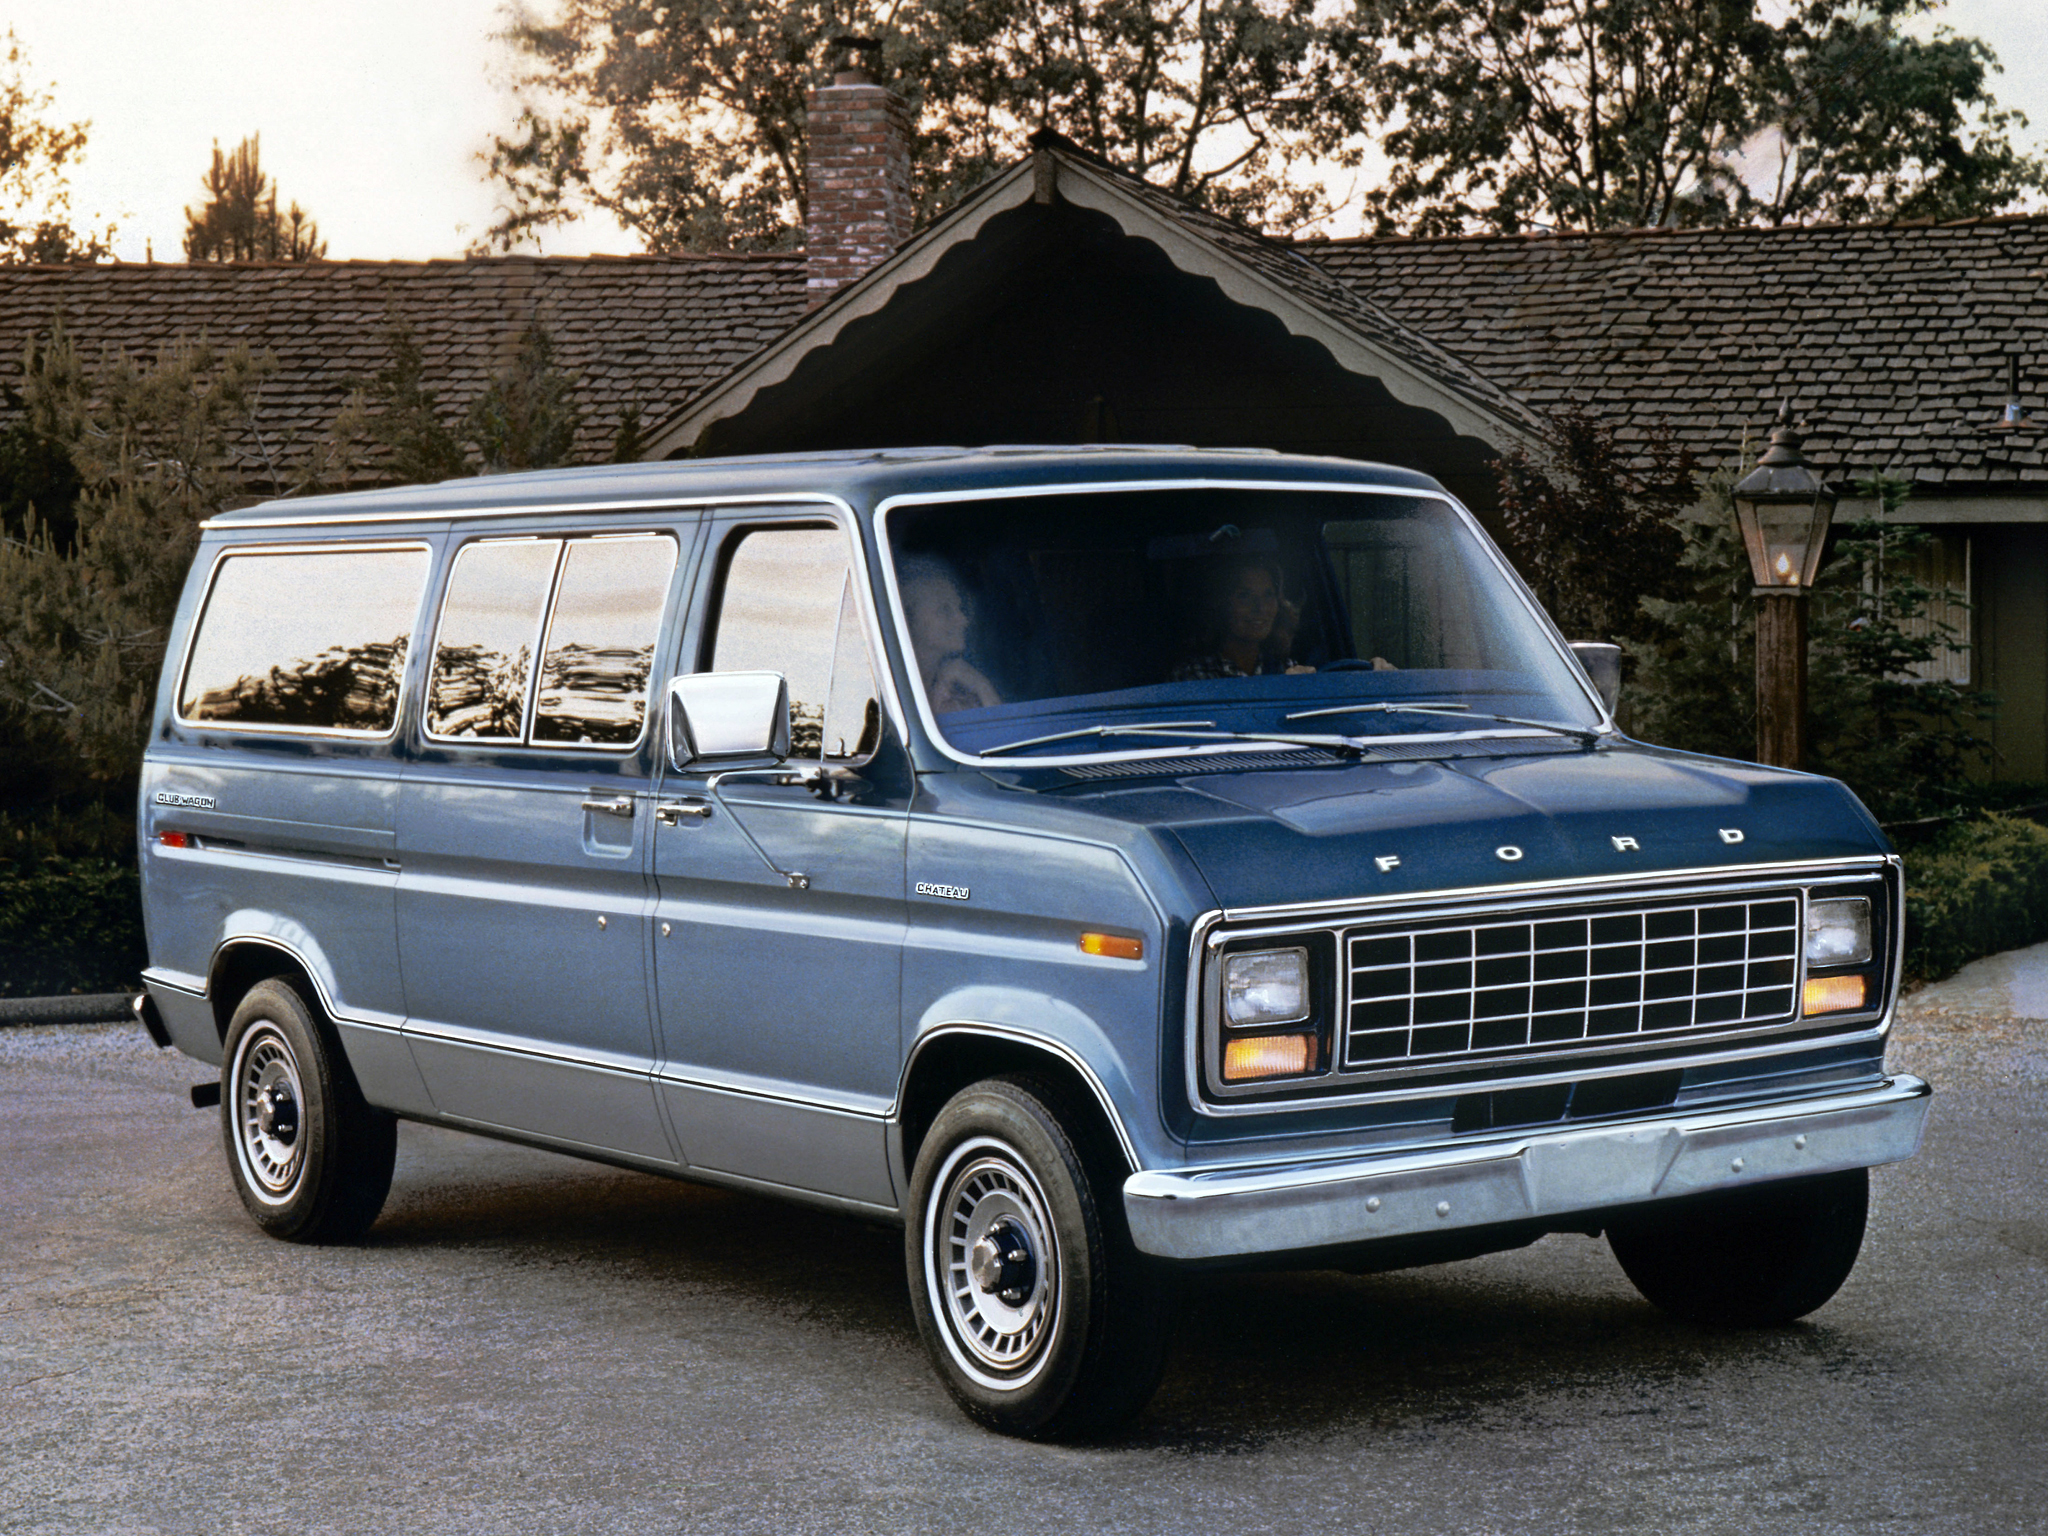 HQ 1976 Ford Econoline Wallpapers | File 2694.7Kb